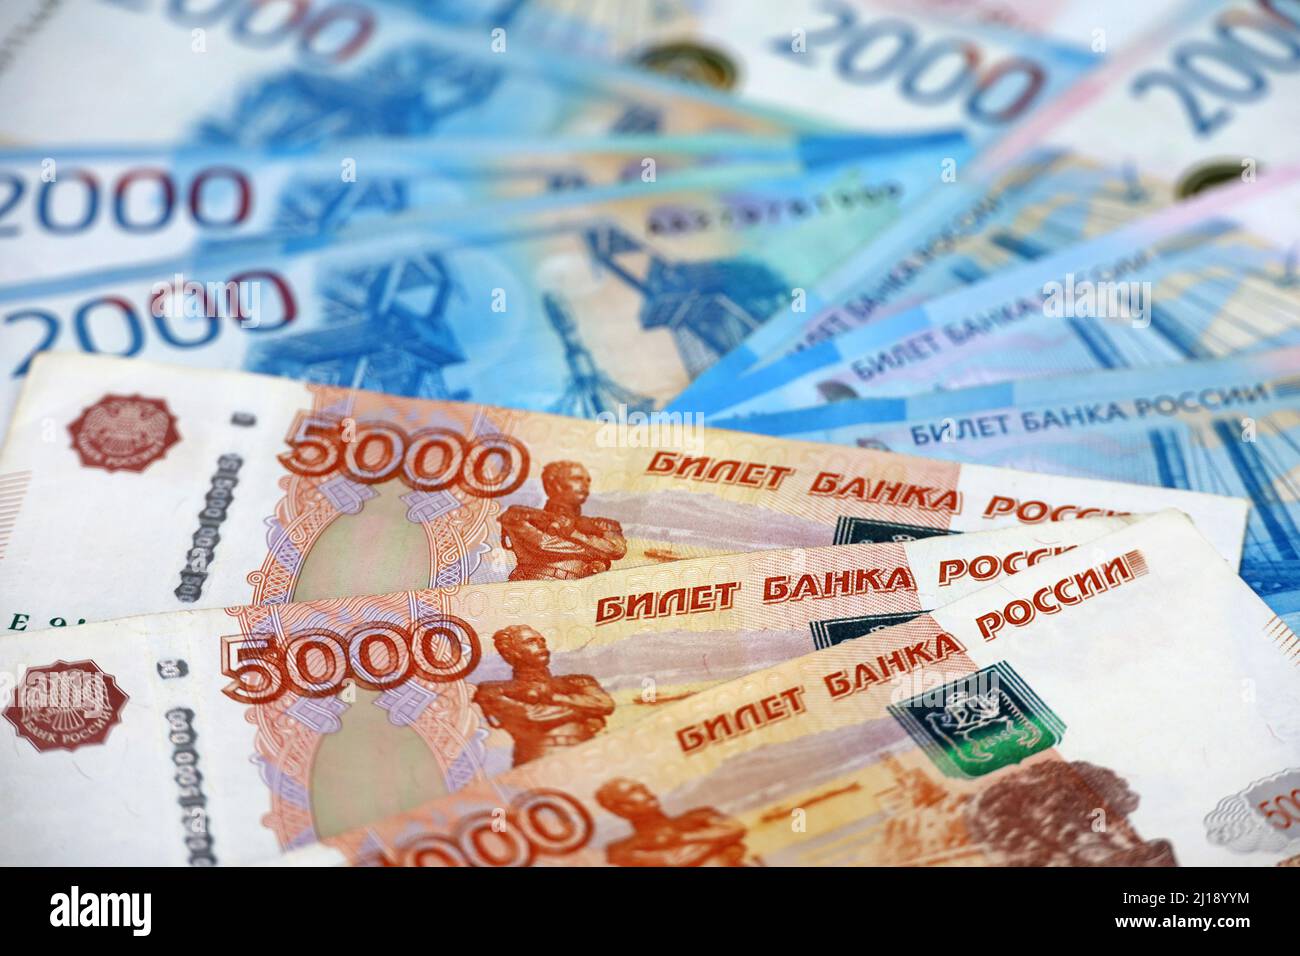 Russian rubles, paper currency. Concept of economy of Russia, exchange rate Stock Photo